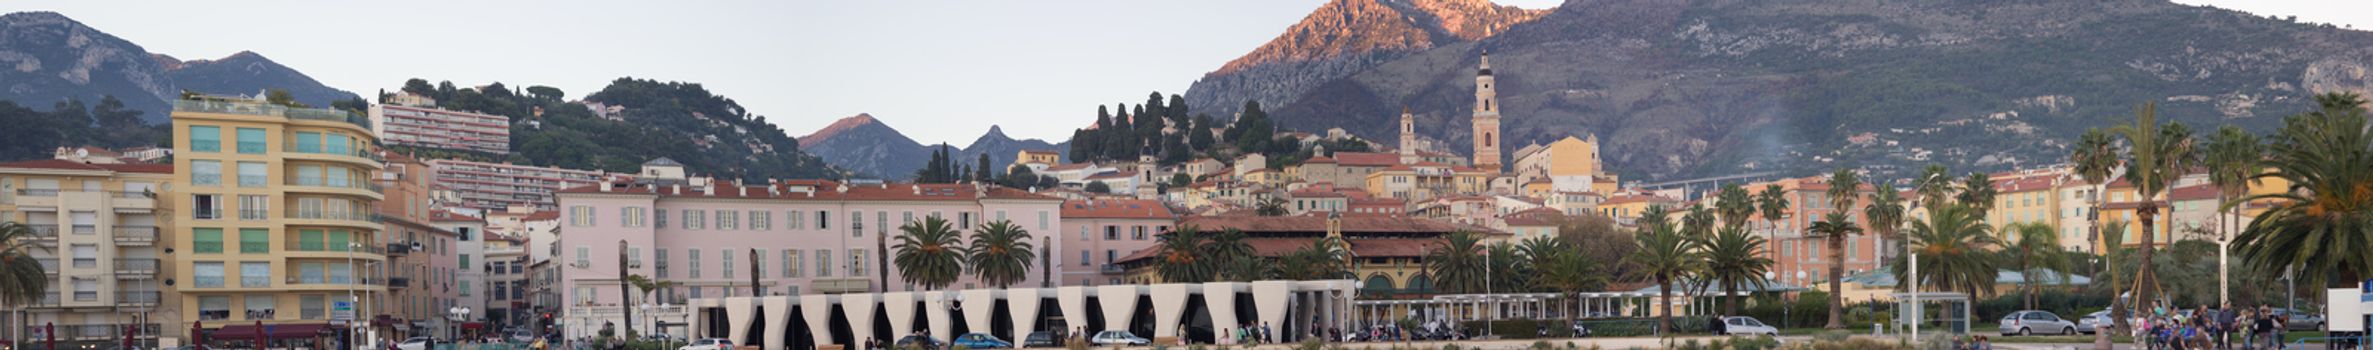 Beautiful Panoramic View of Menton on the french Riviera in the South of France